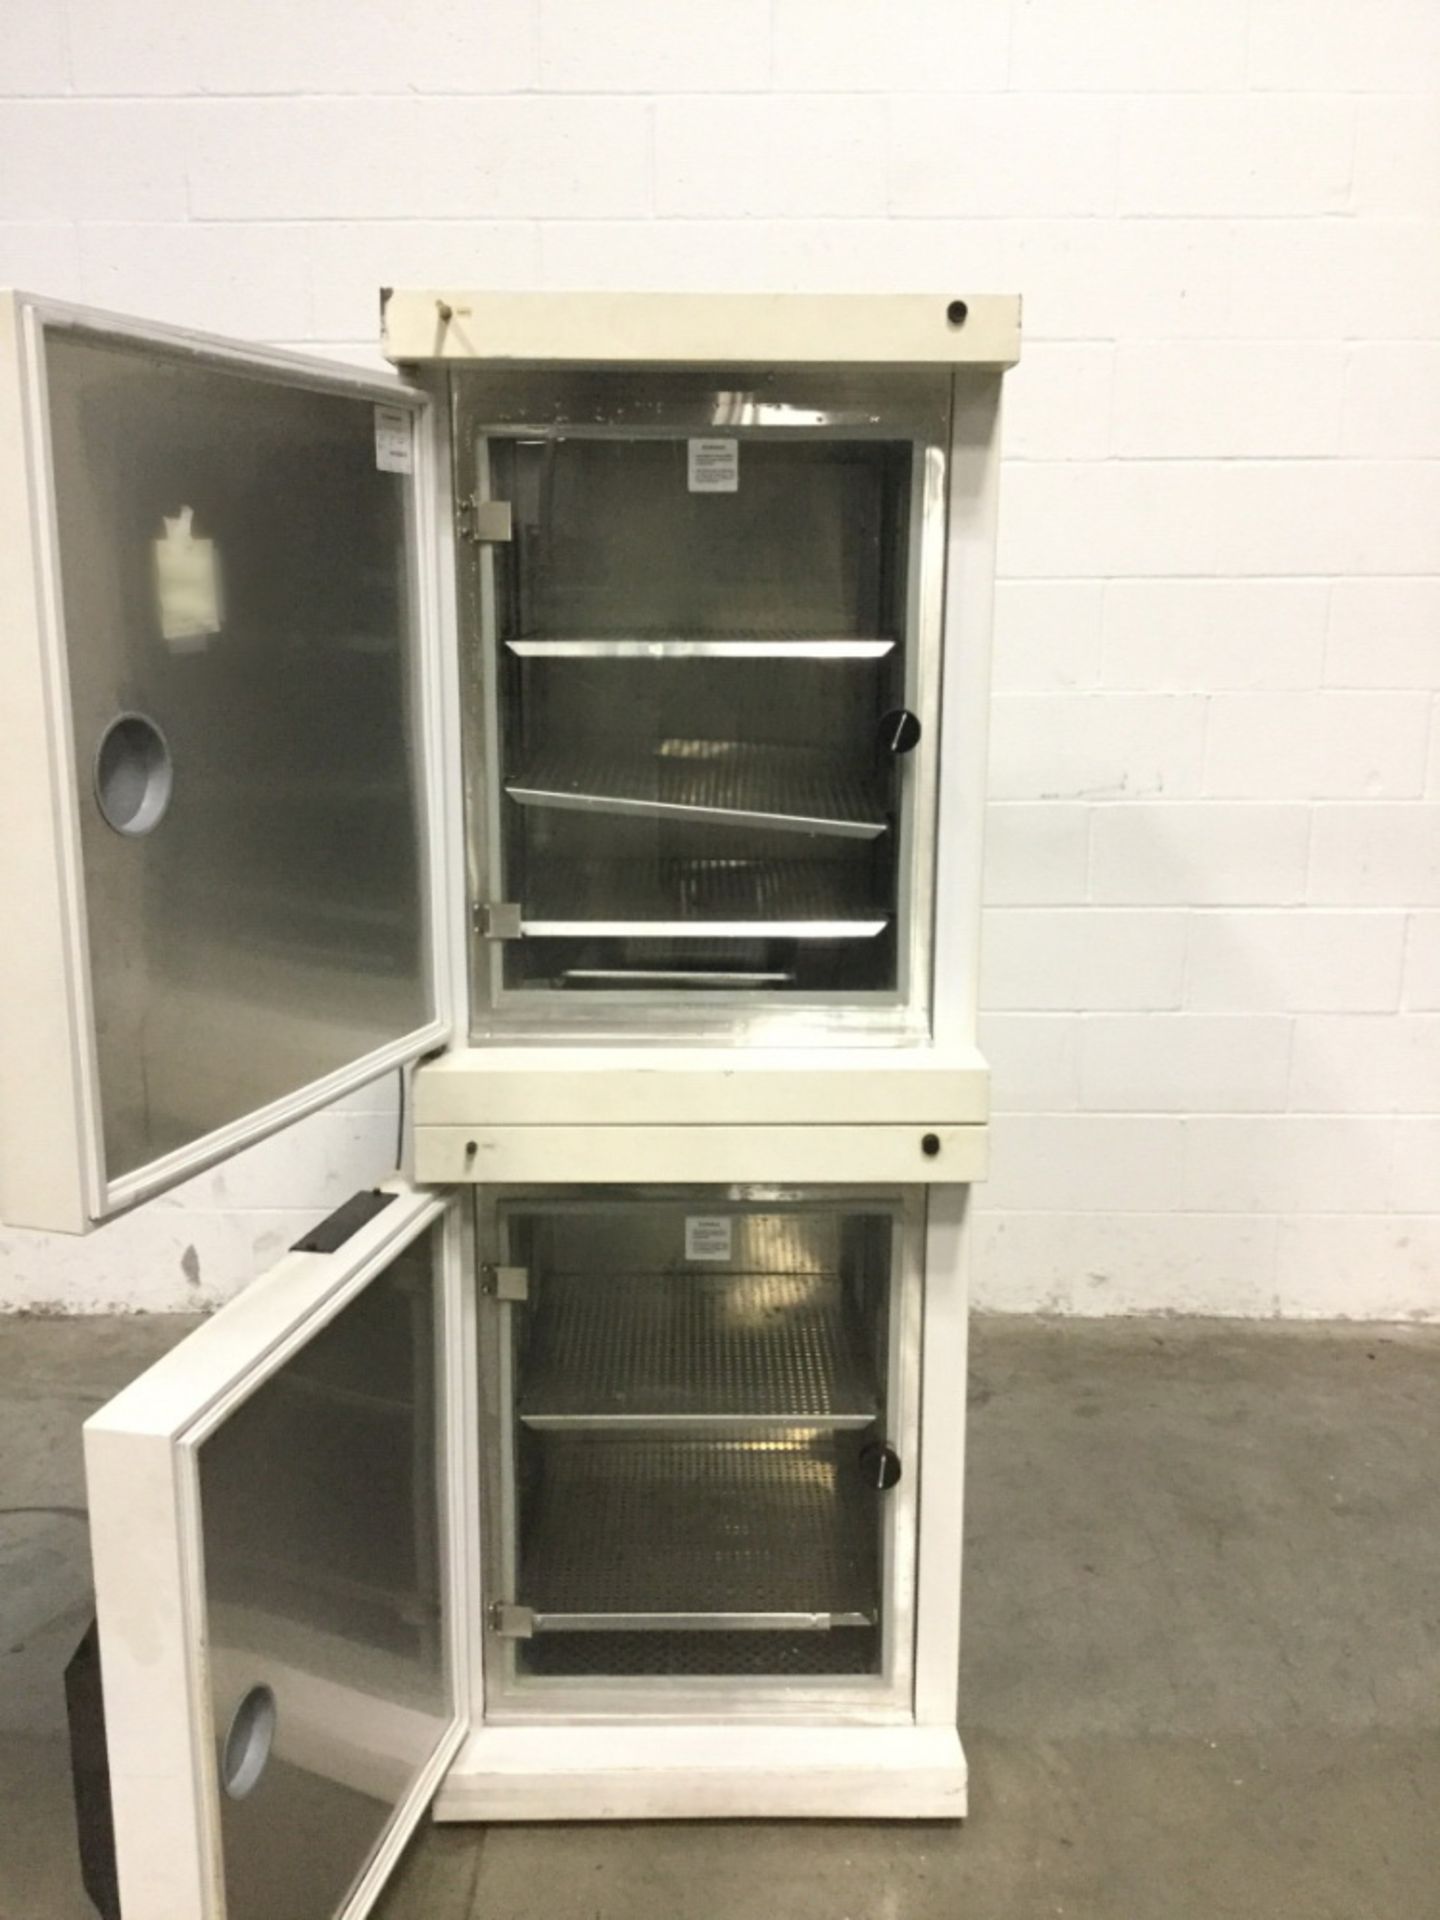 Fisher Scientific Water Jacketed Double Chamber CO2 Incubator, Model 10, S/N 9310-012 - Image 3 of 3